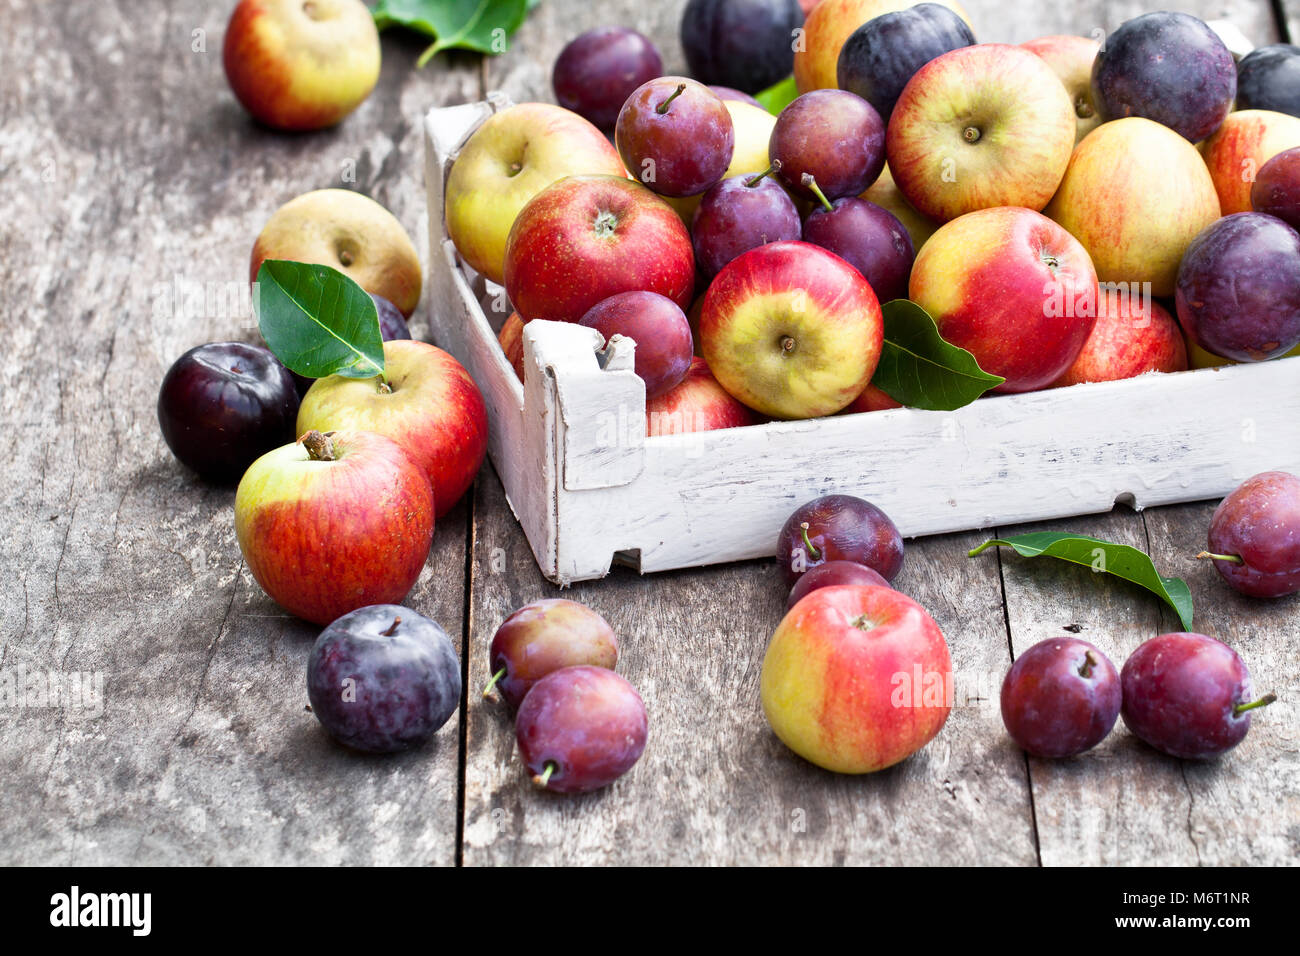 Seasonal  fruits. Apples and plums on a wooden table Stock Photo